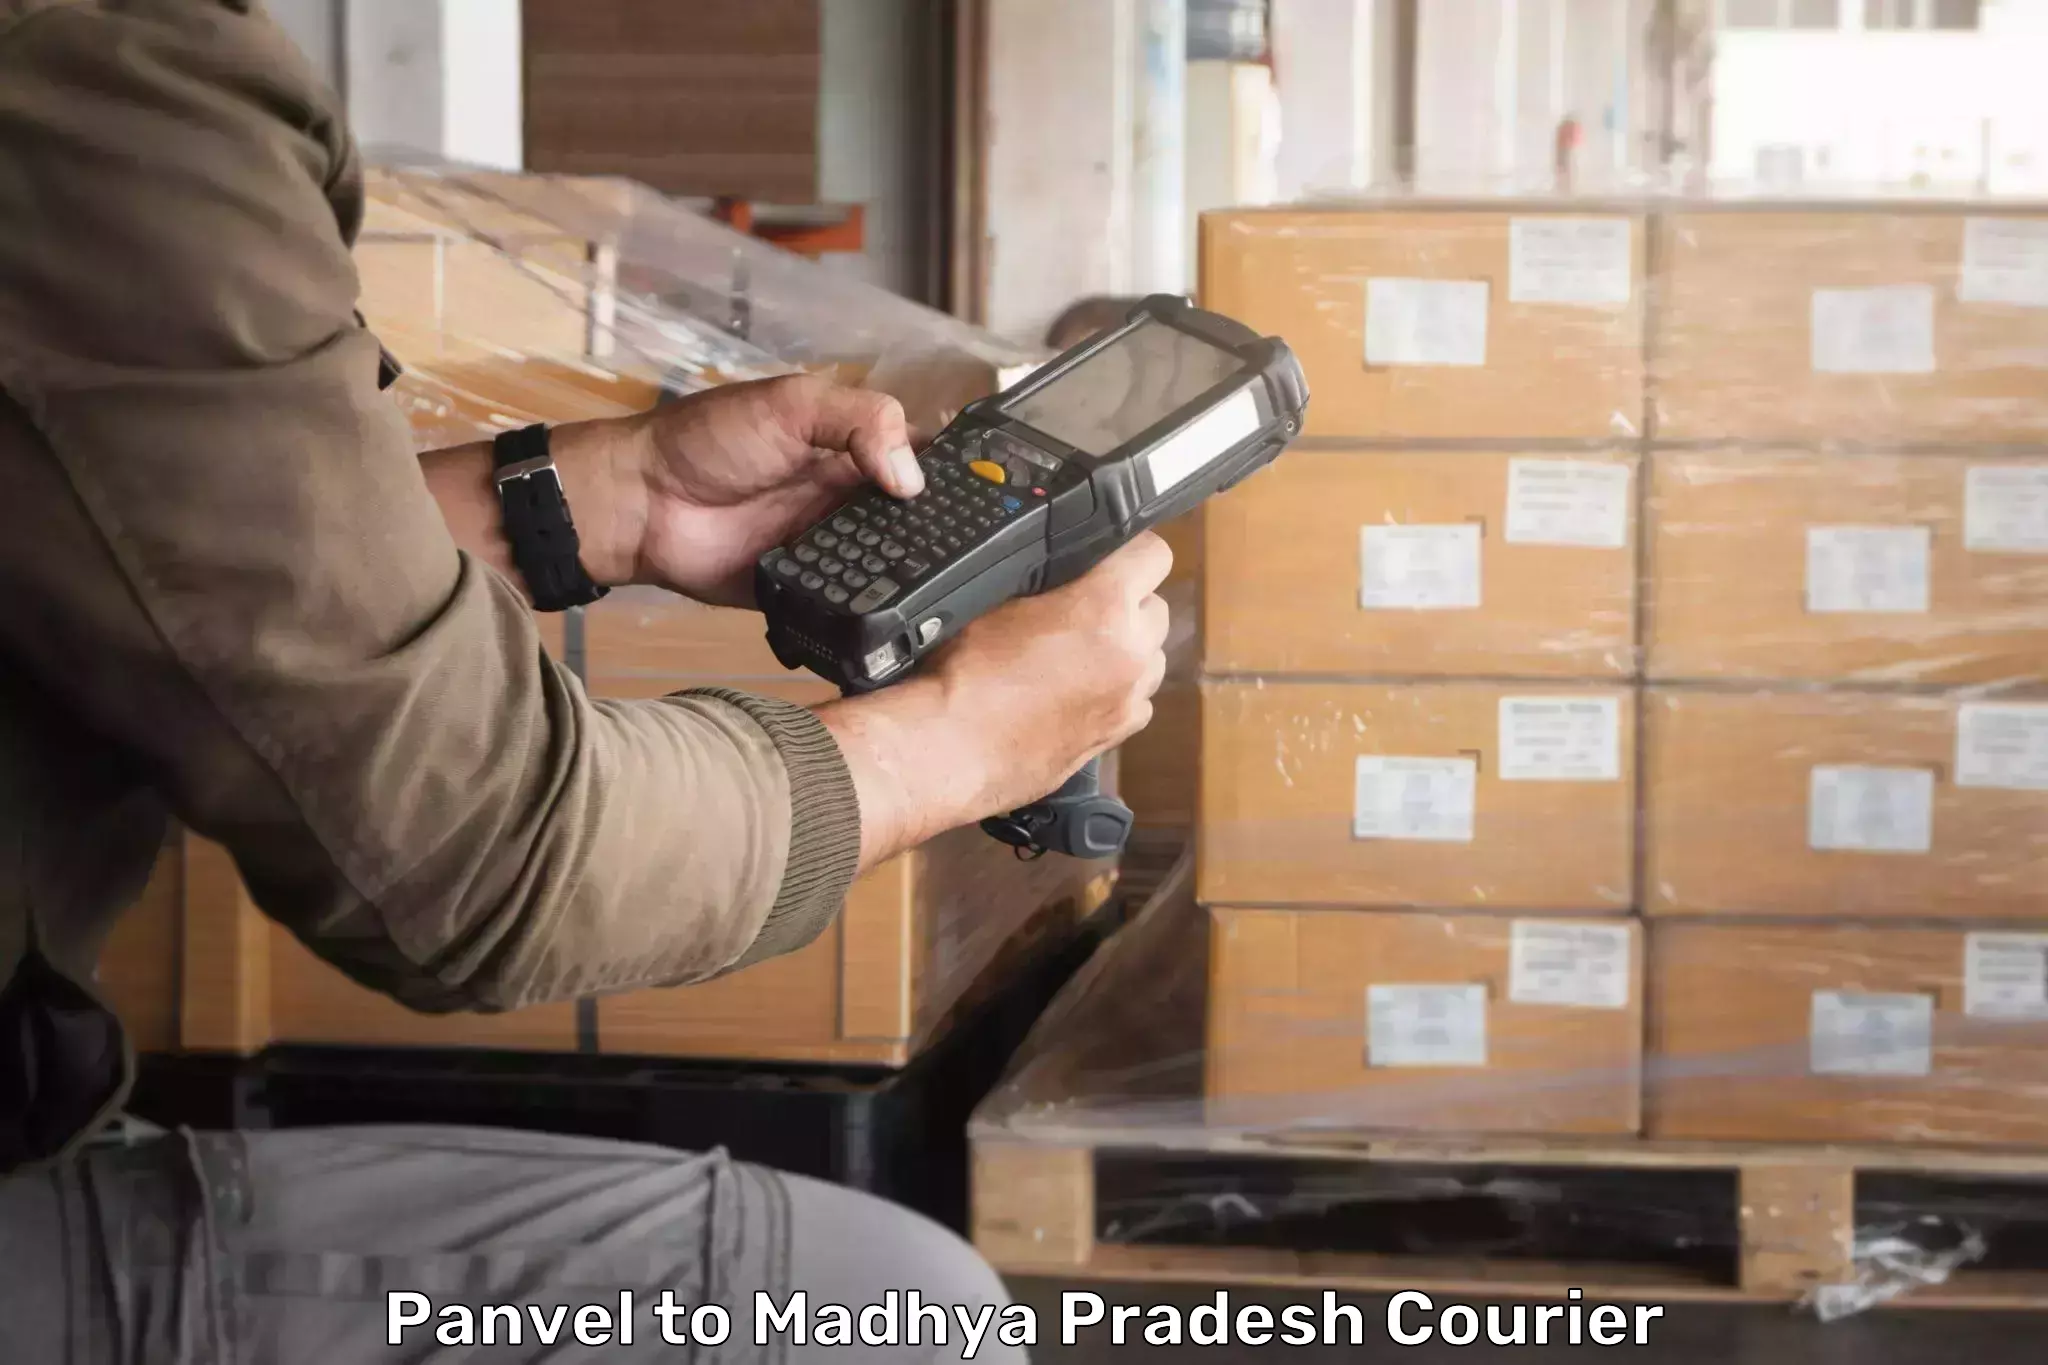 Reliable delivery network Panvel to Madhya Pradesh